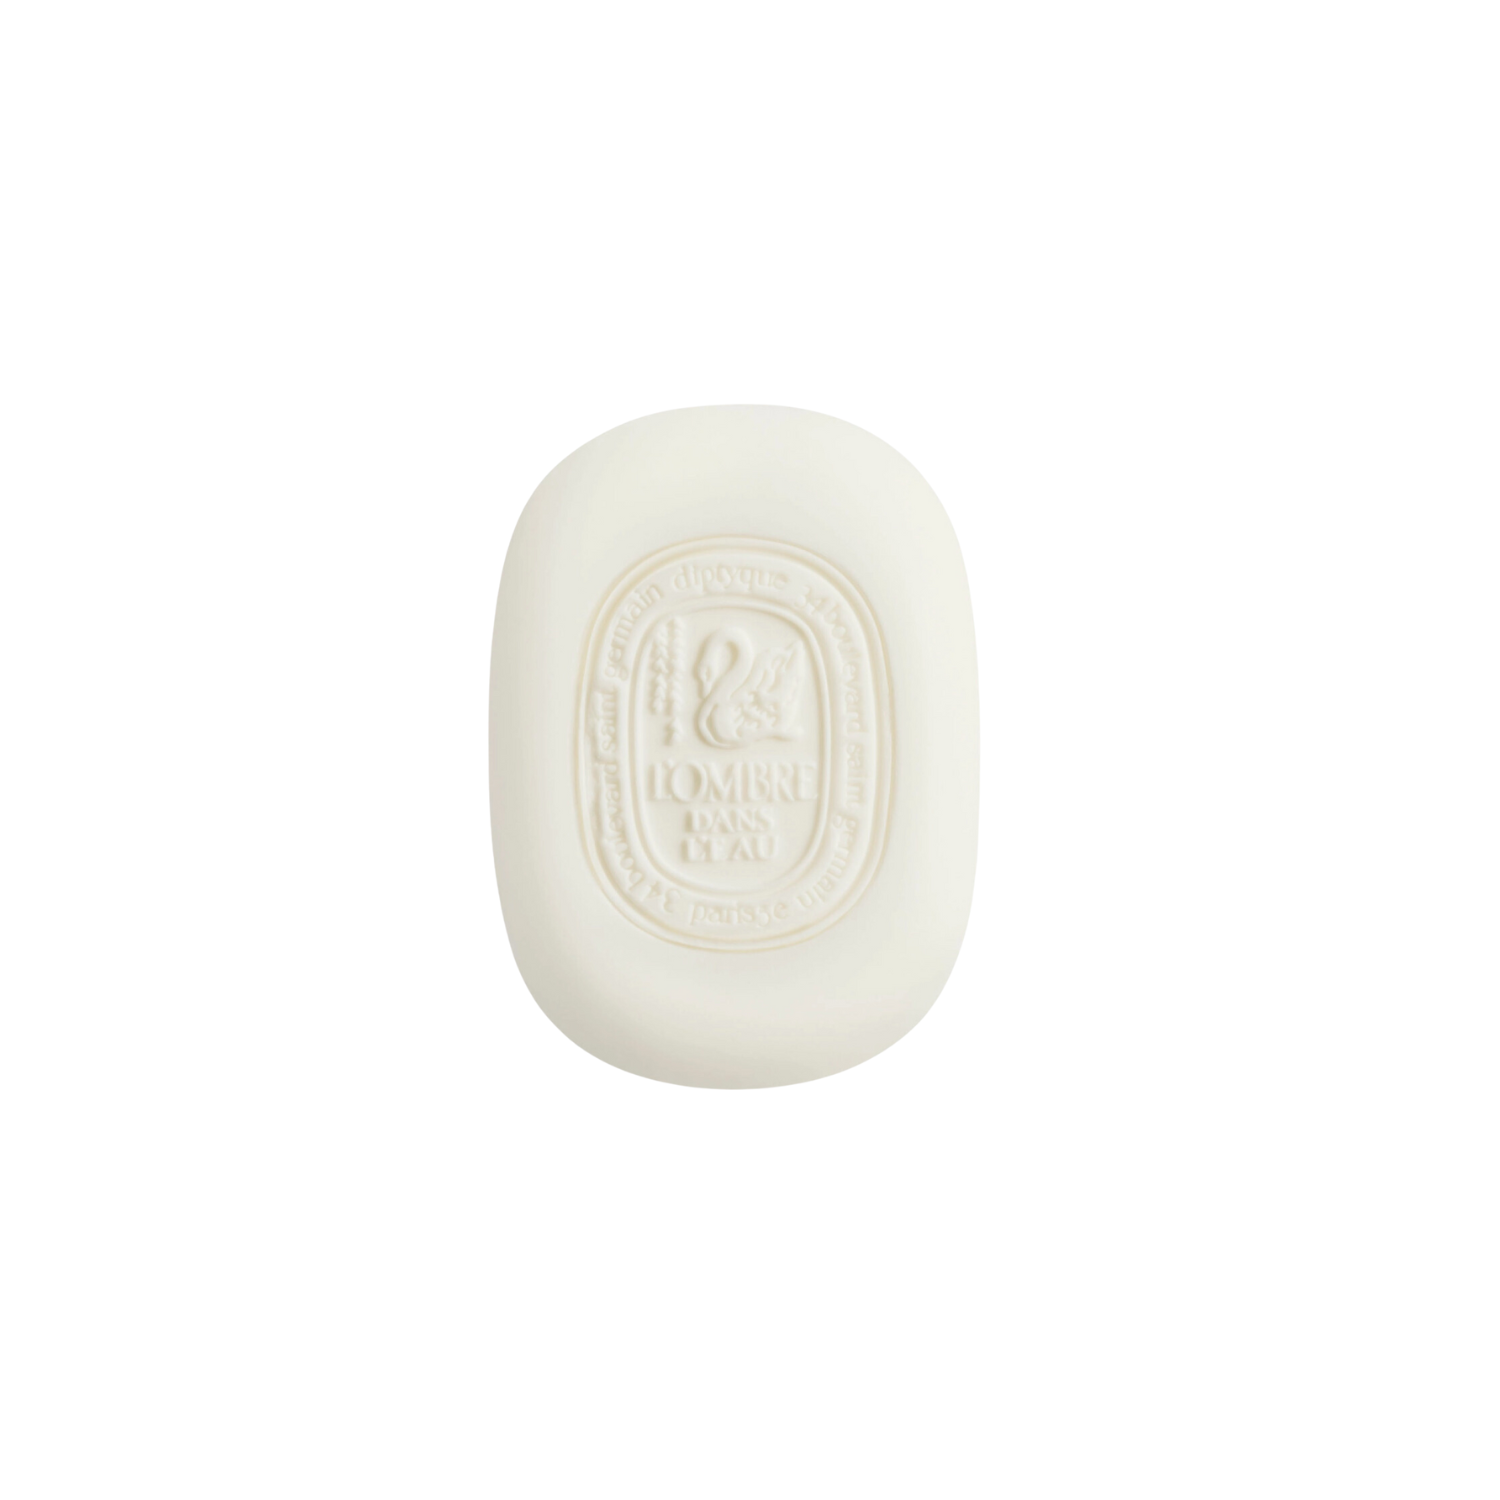 Diptyque scented bar soap